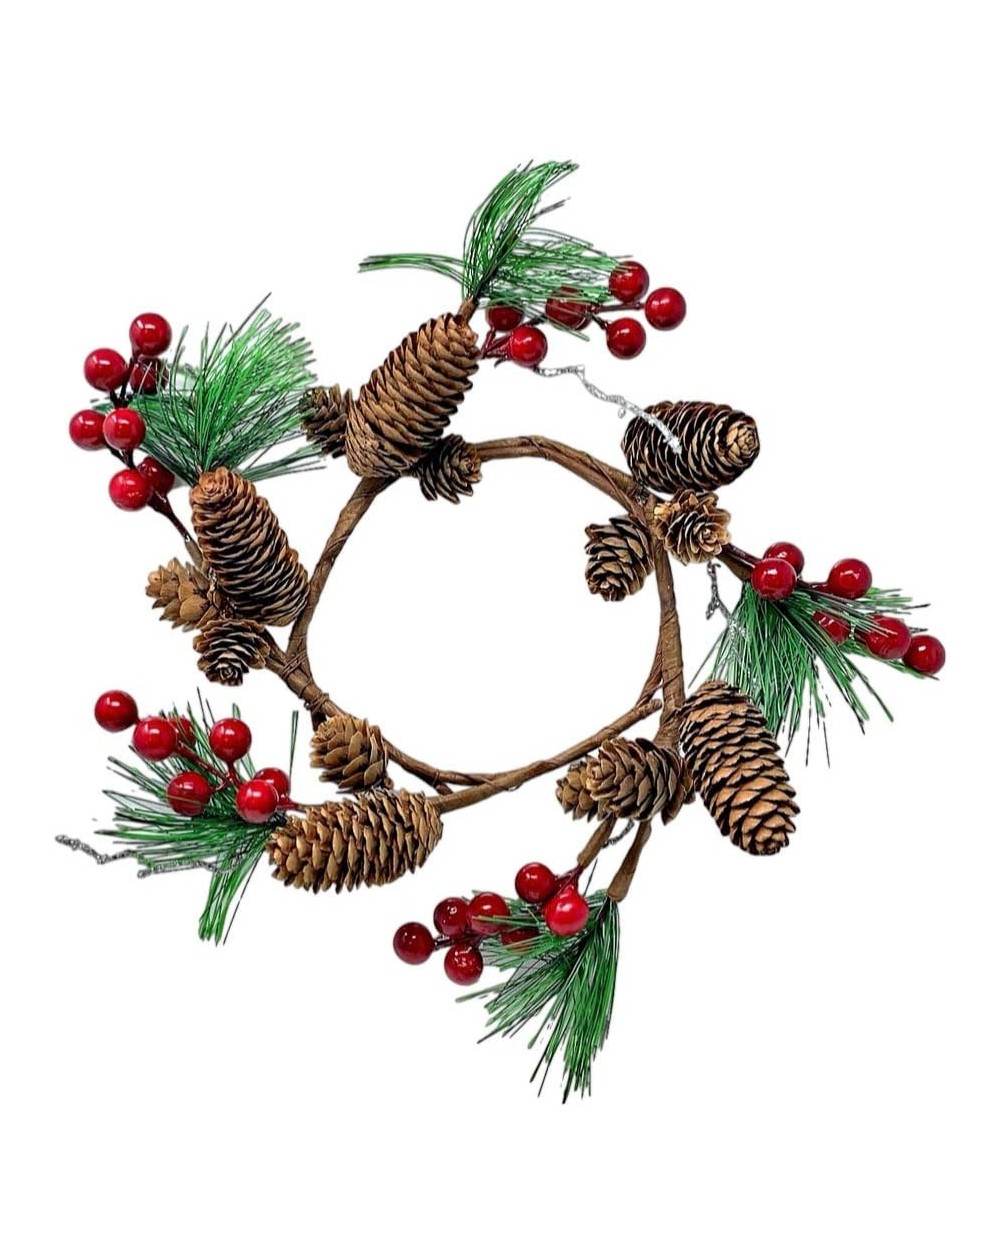 Wreaths Pinecones Pine Red Berries Wreath Candle Ring Ornament for Rustic Wedding or Christmas Table Decor Approx. 10 inch fi...